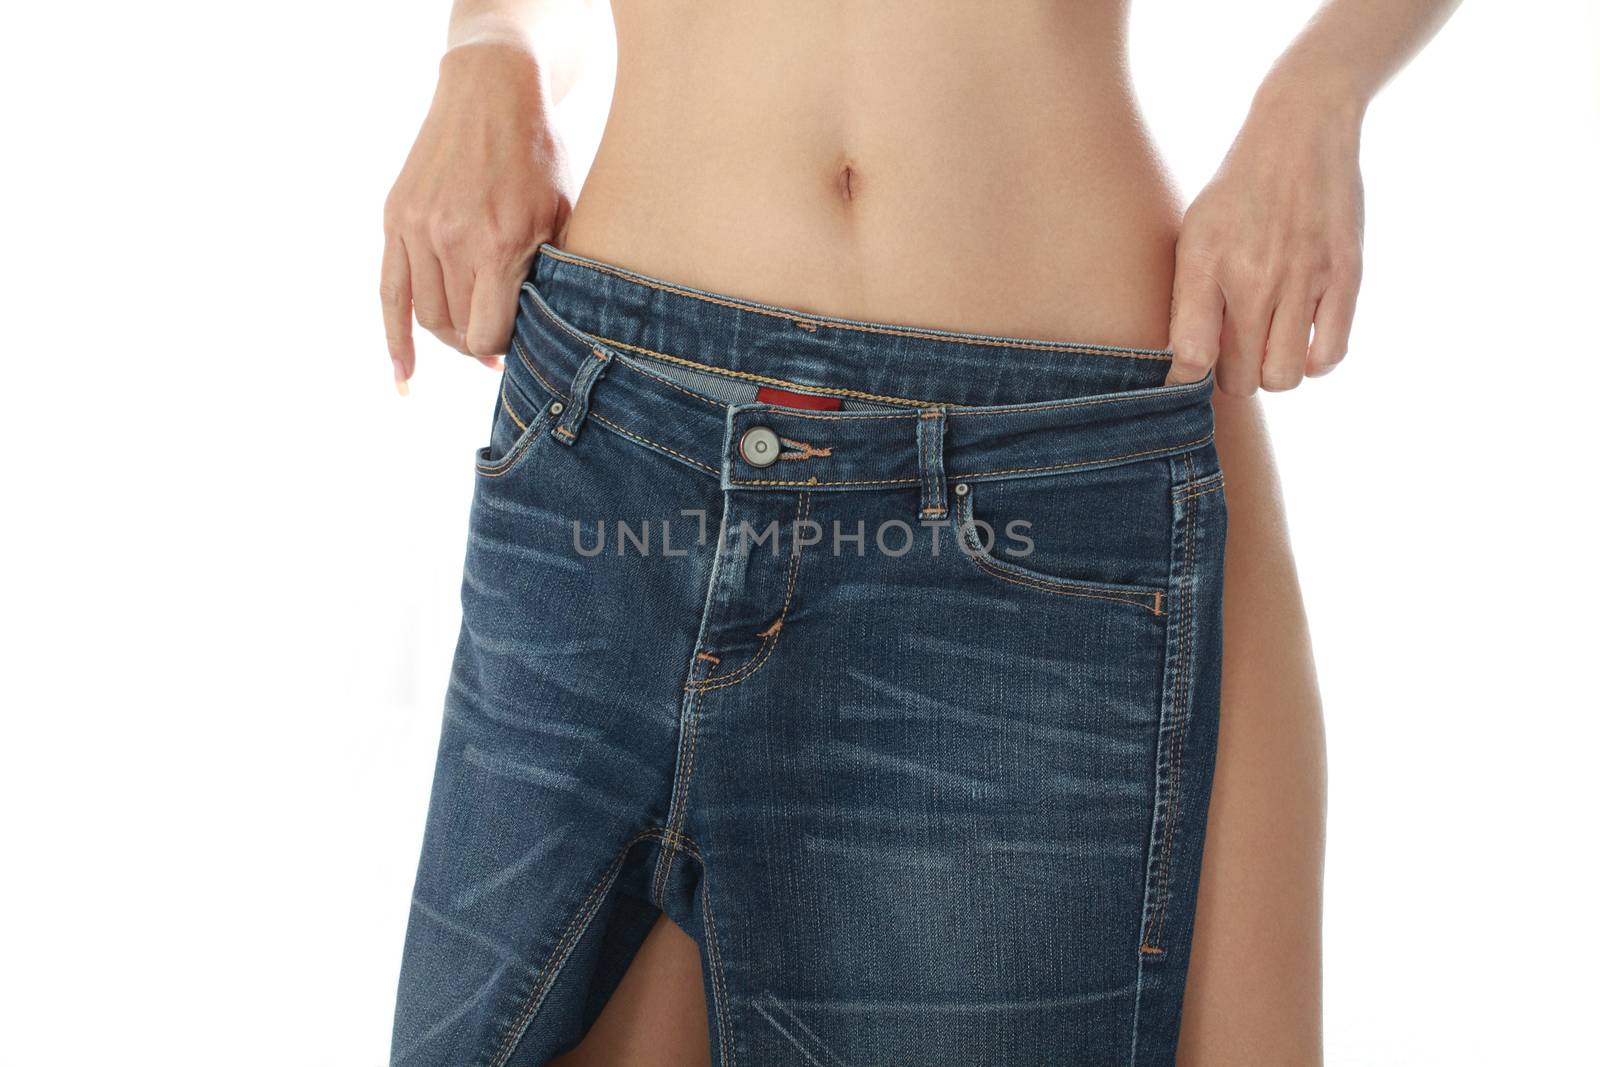 Sexy female take off jeans, isolated on white background.